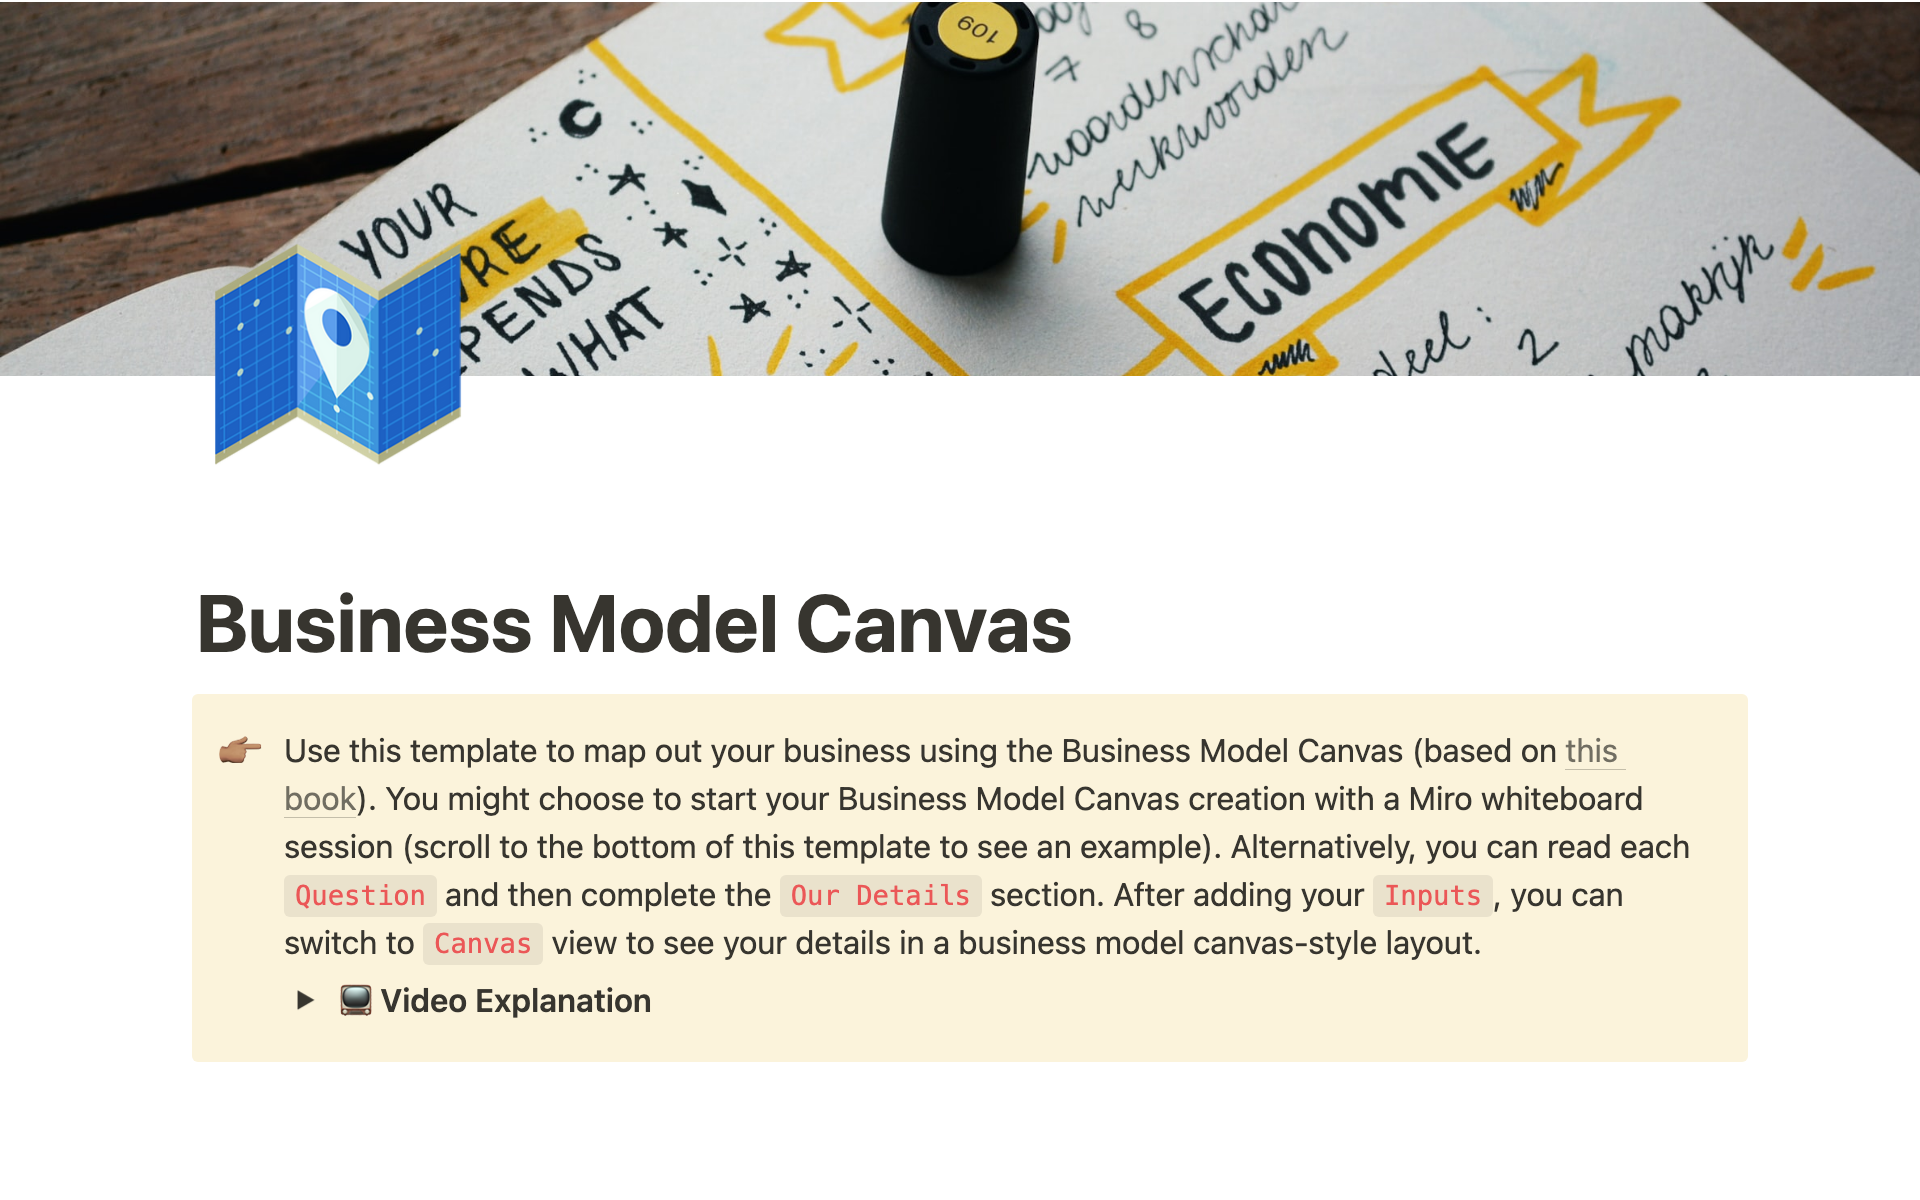 Use this template to map out your business using the Business Model Canvas